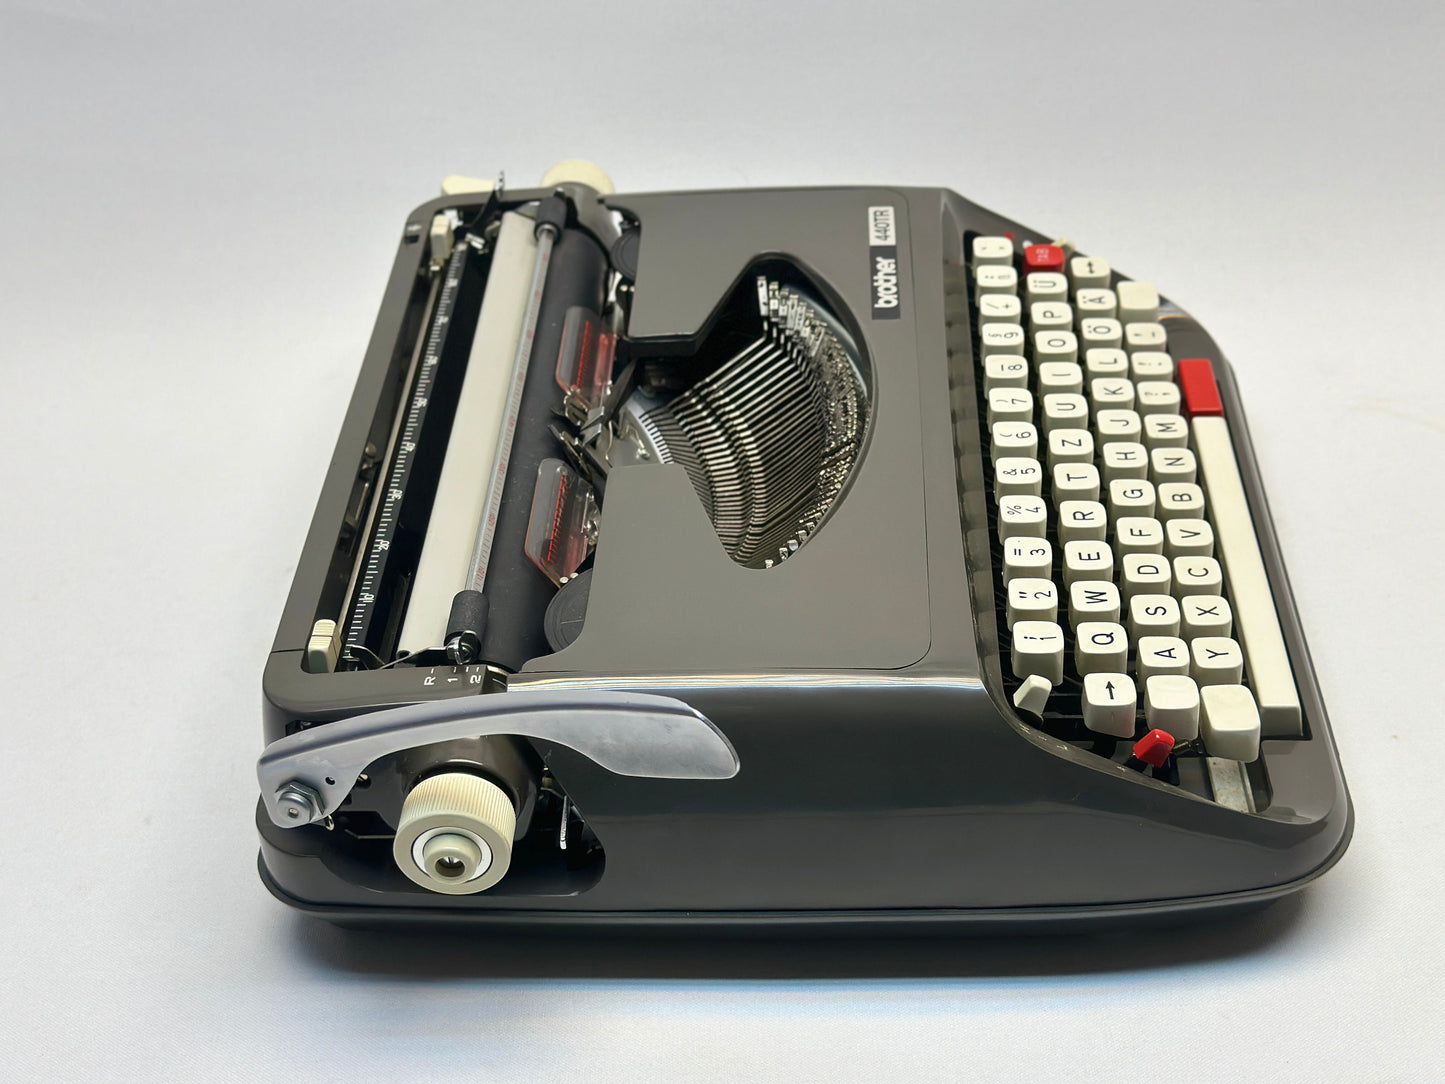 Step Back in Time with the Brother 440 TR Model Typewriter - Classic Black Design, QWERTZ and White Keyboards, Antique Gift